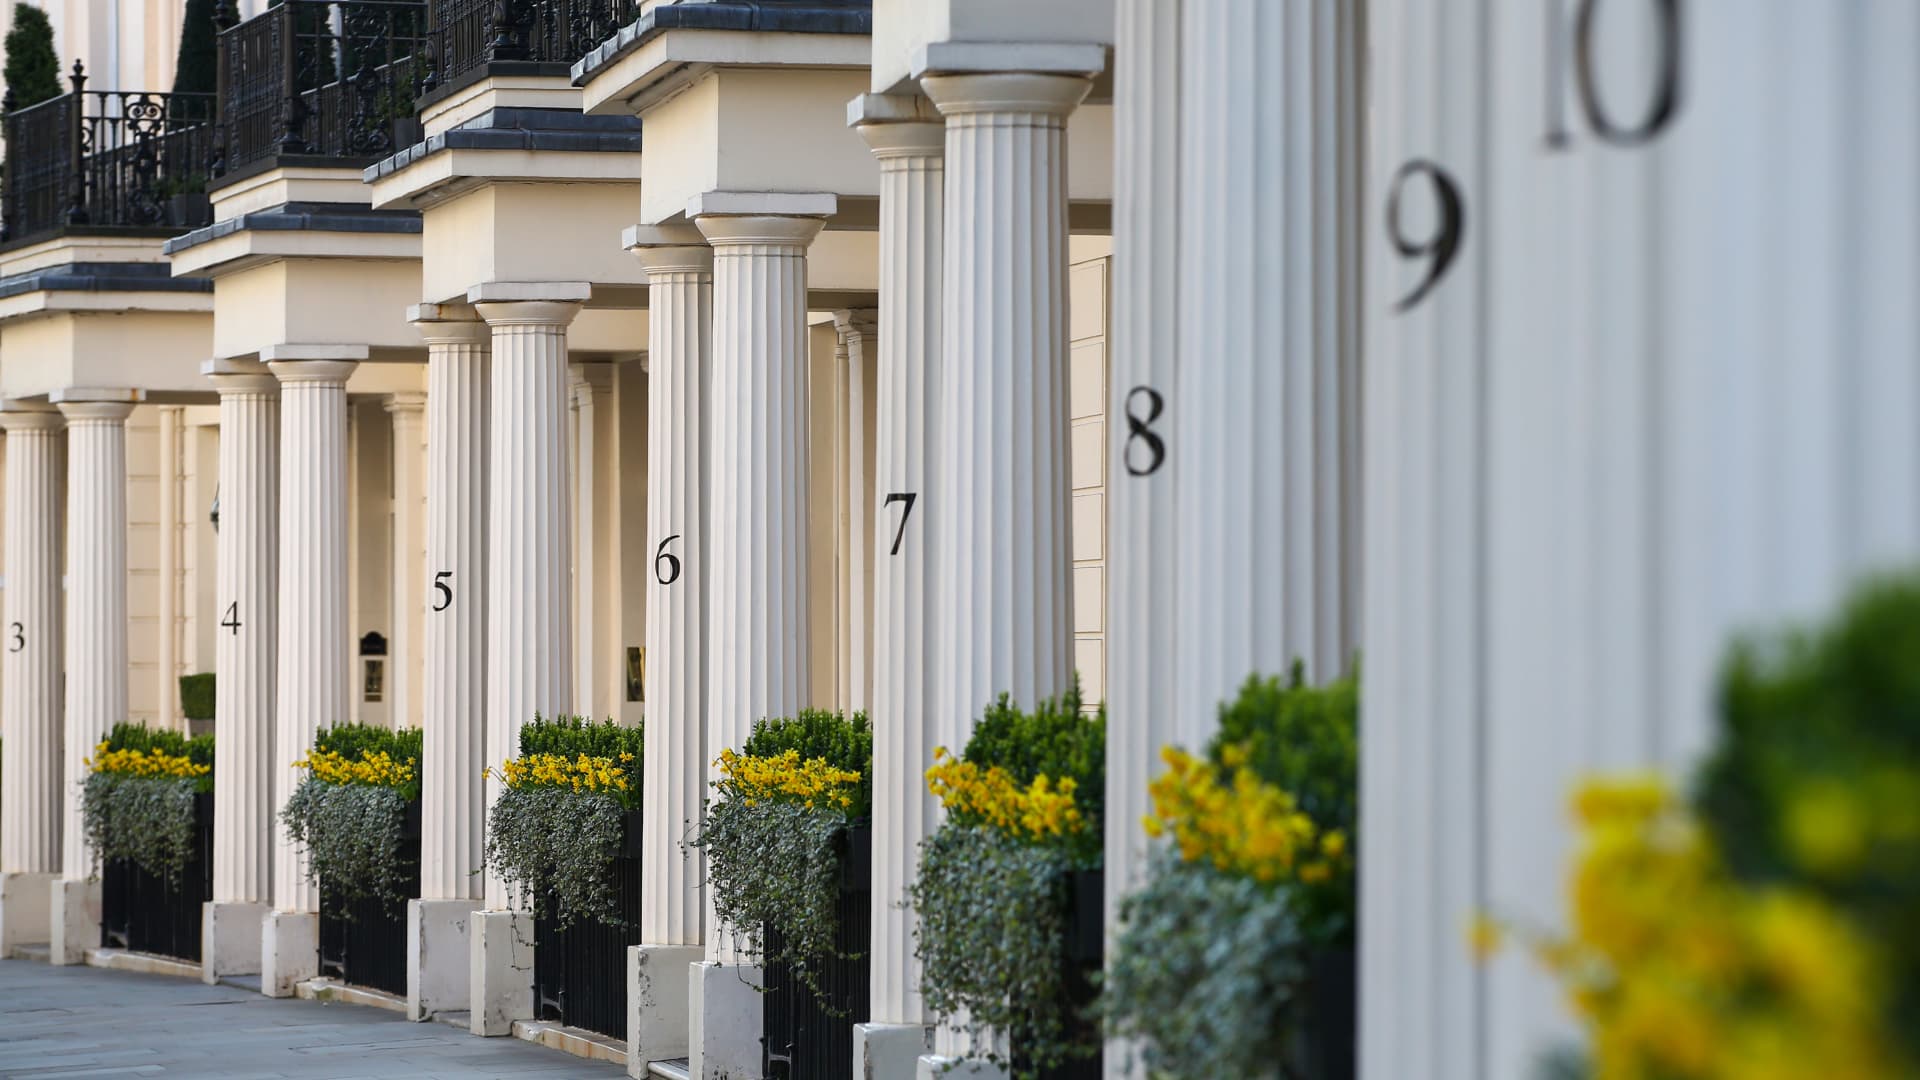 London’s luxury home sellers turn to WhatsApp as private sales surge